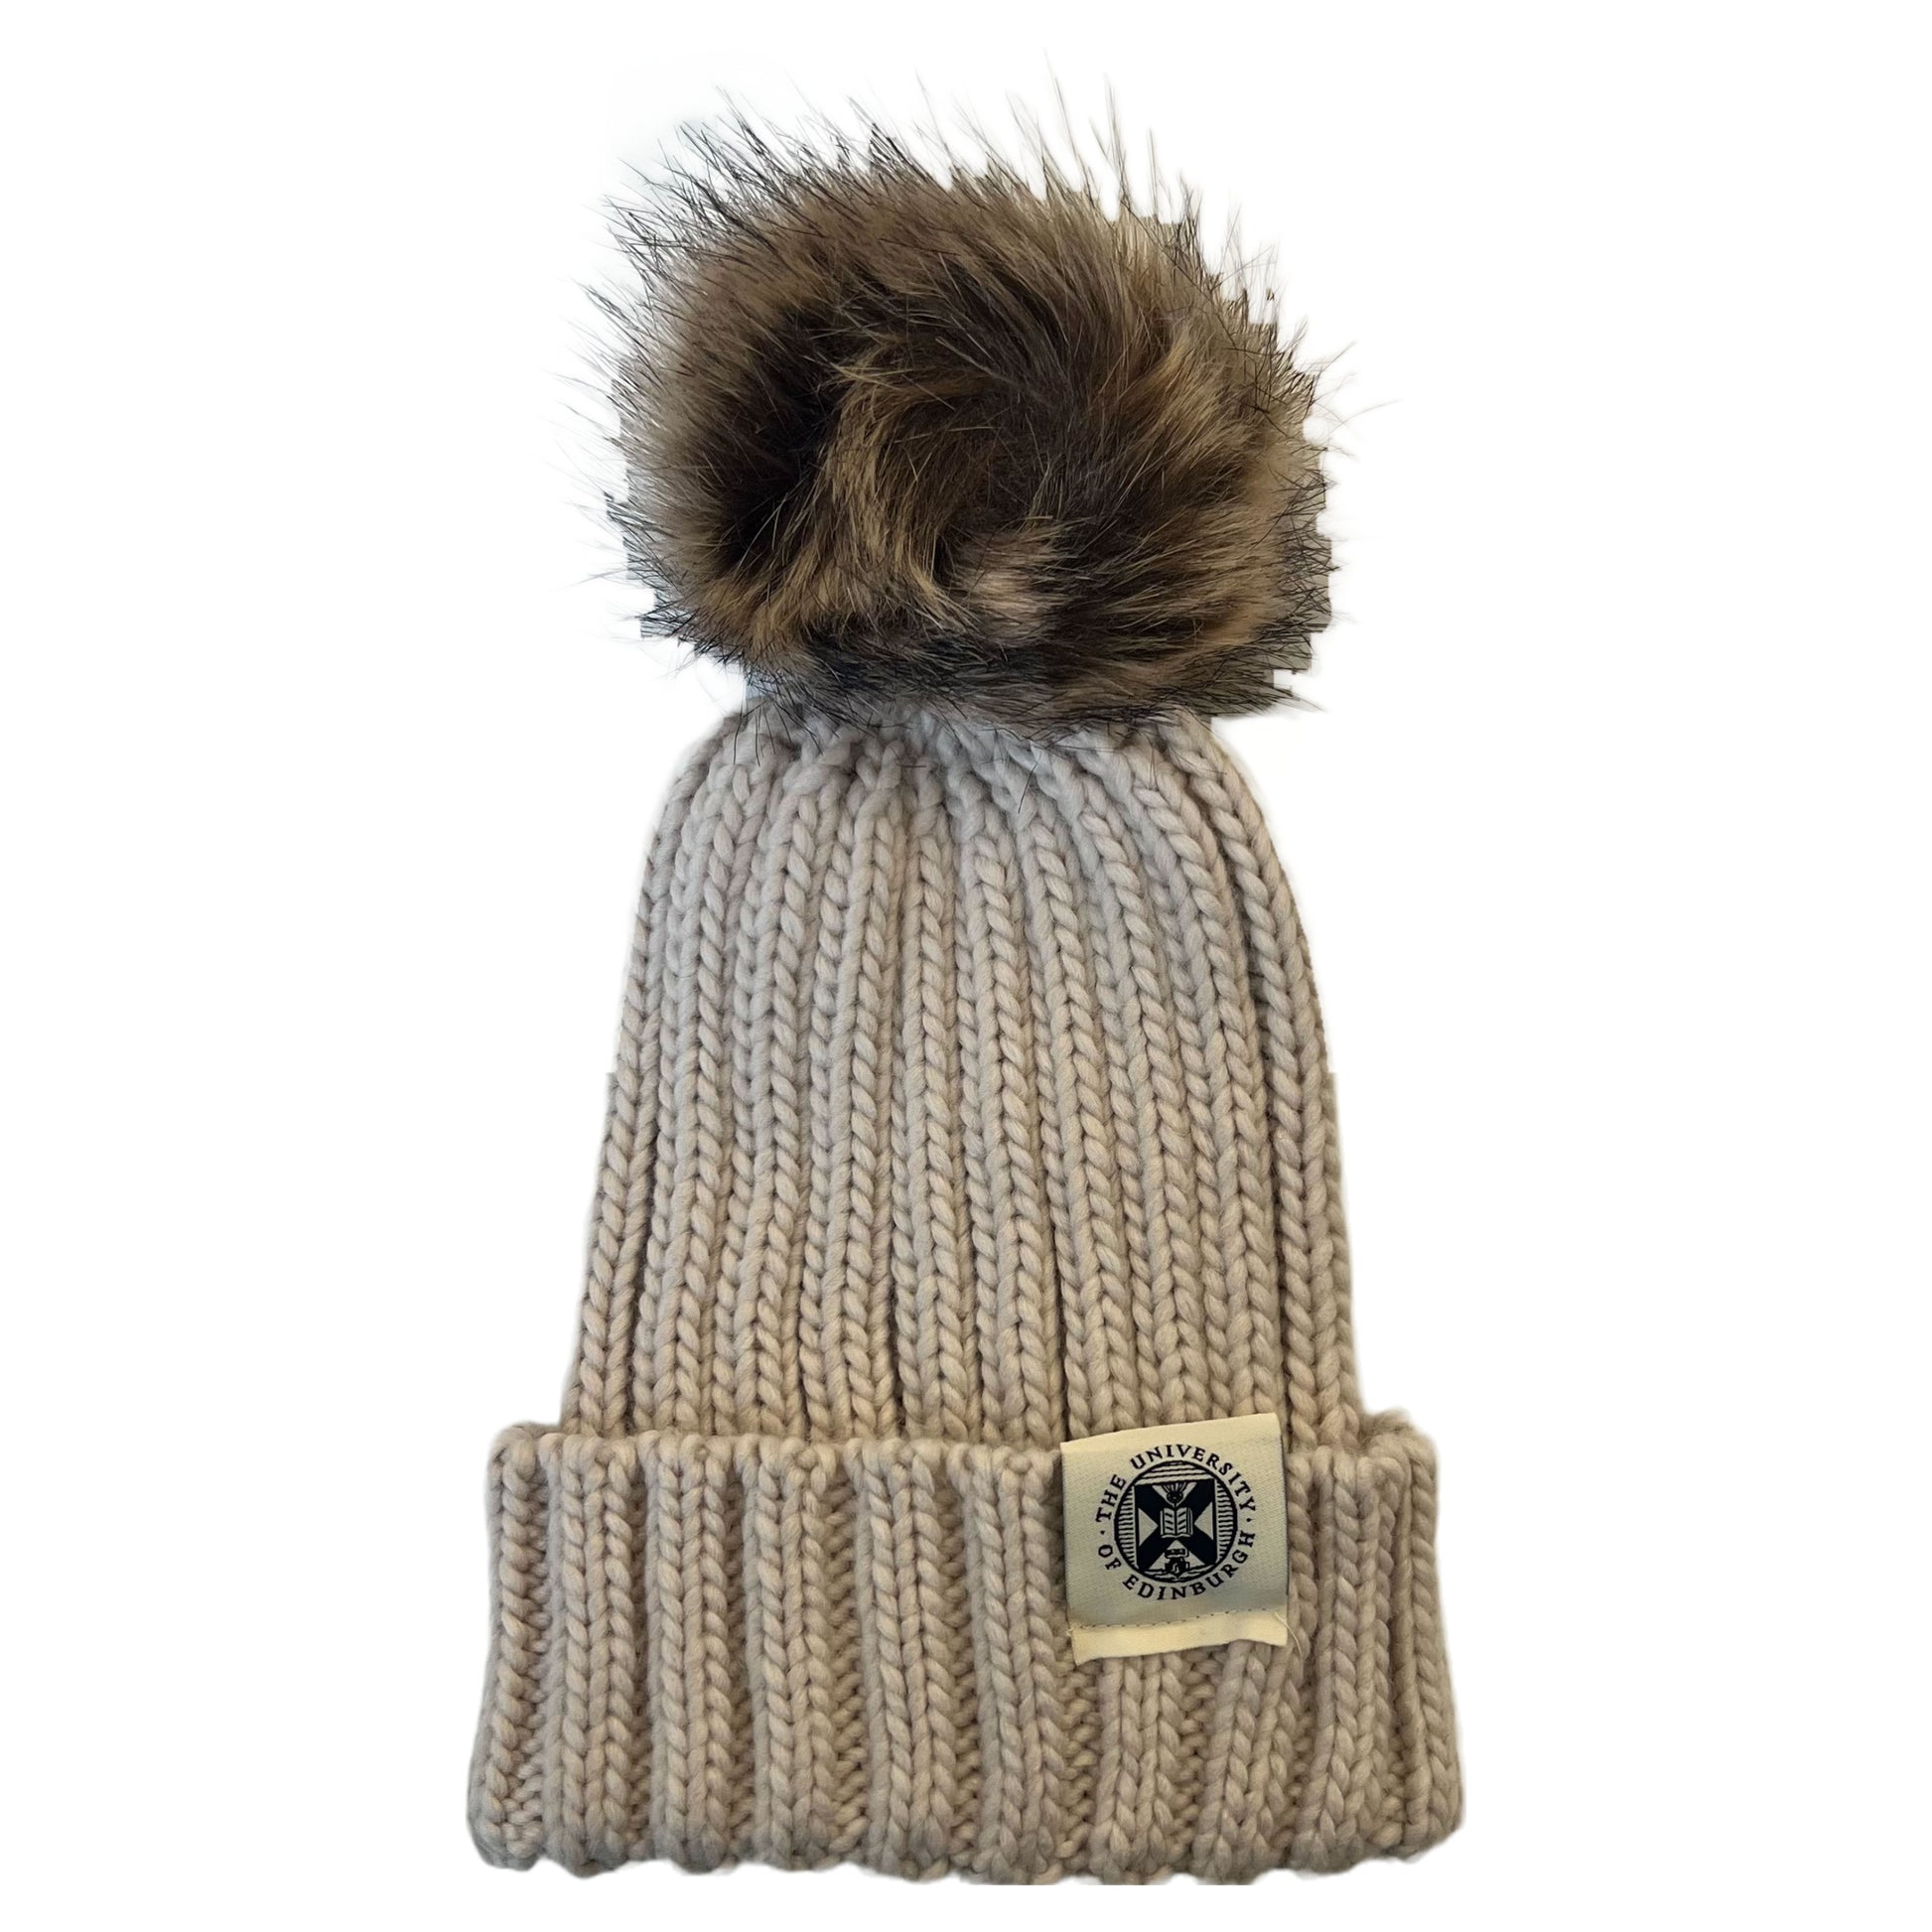 oatmeal beanie with brown pom pom and woven tag featuring university crest in navy